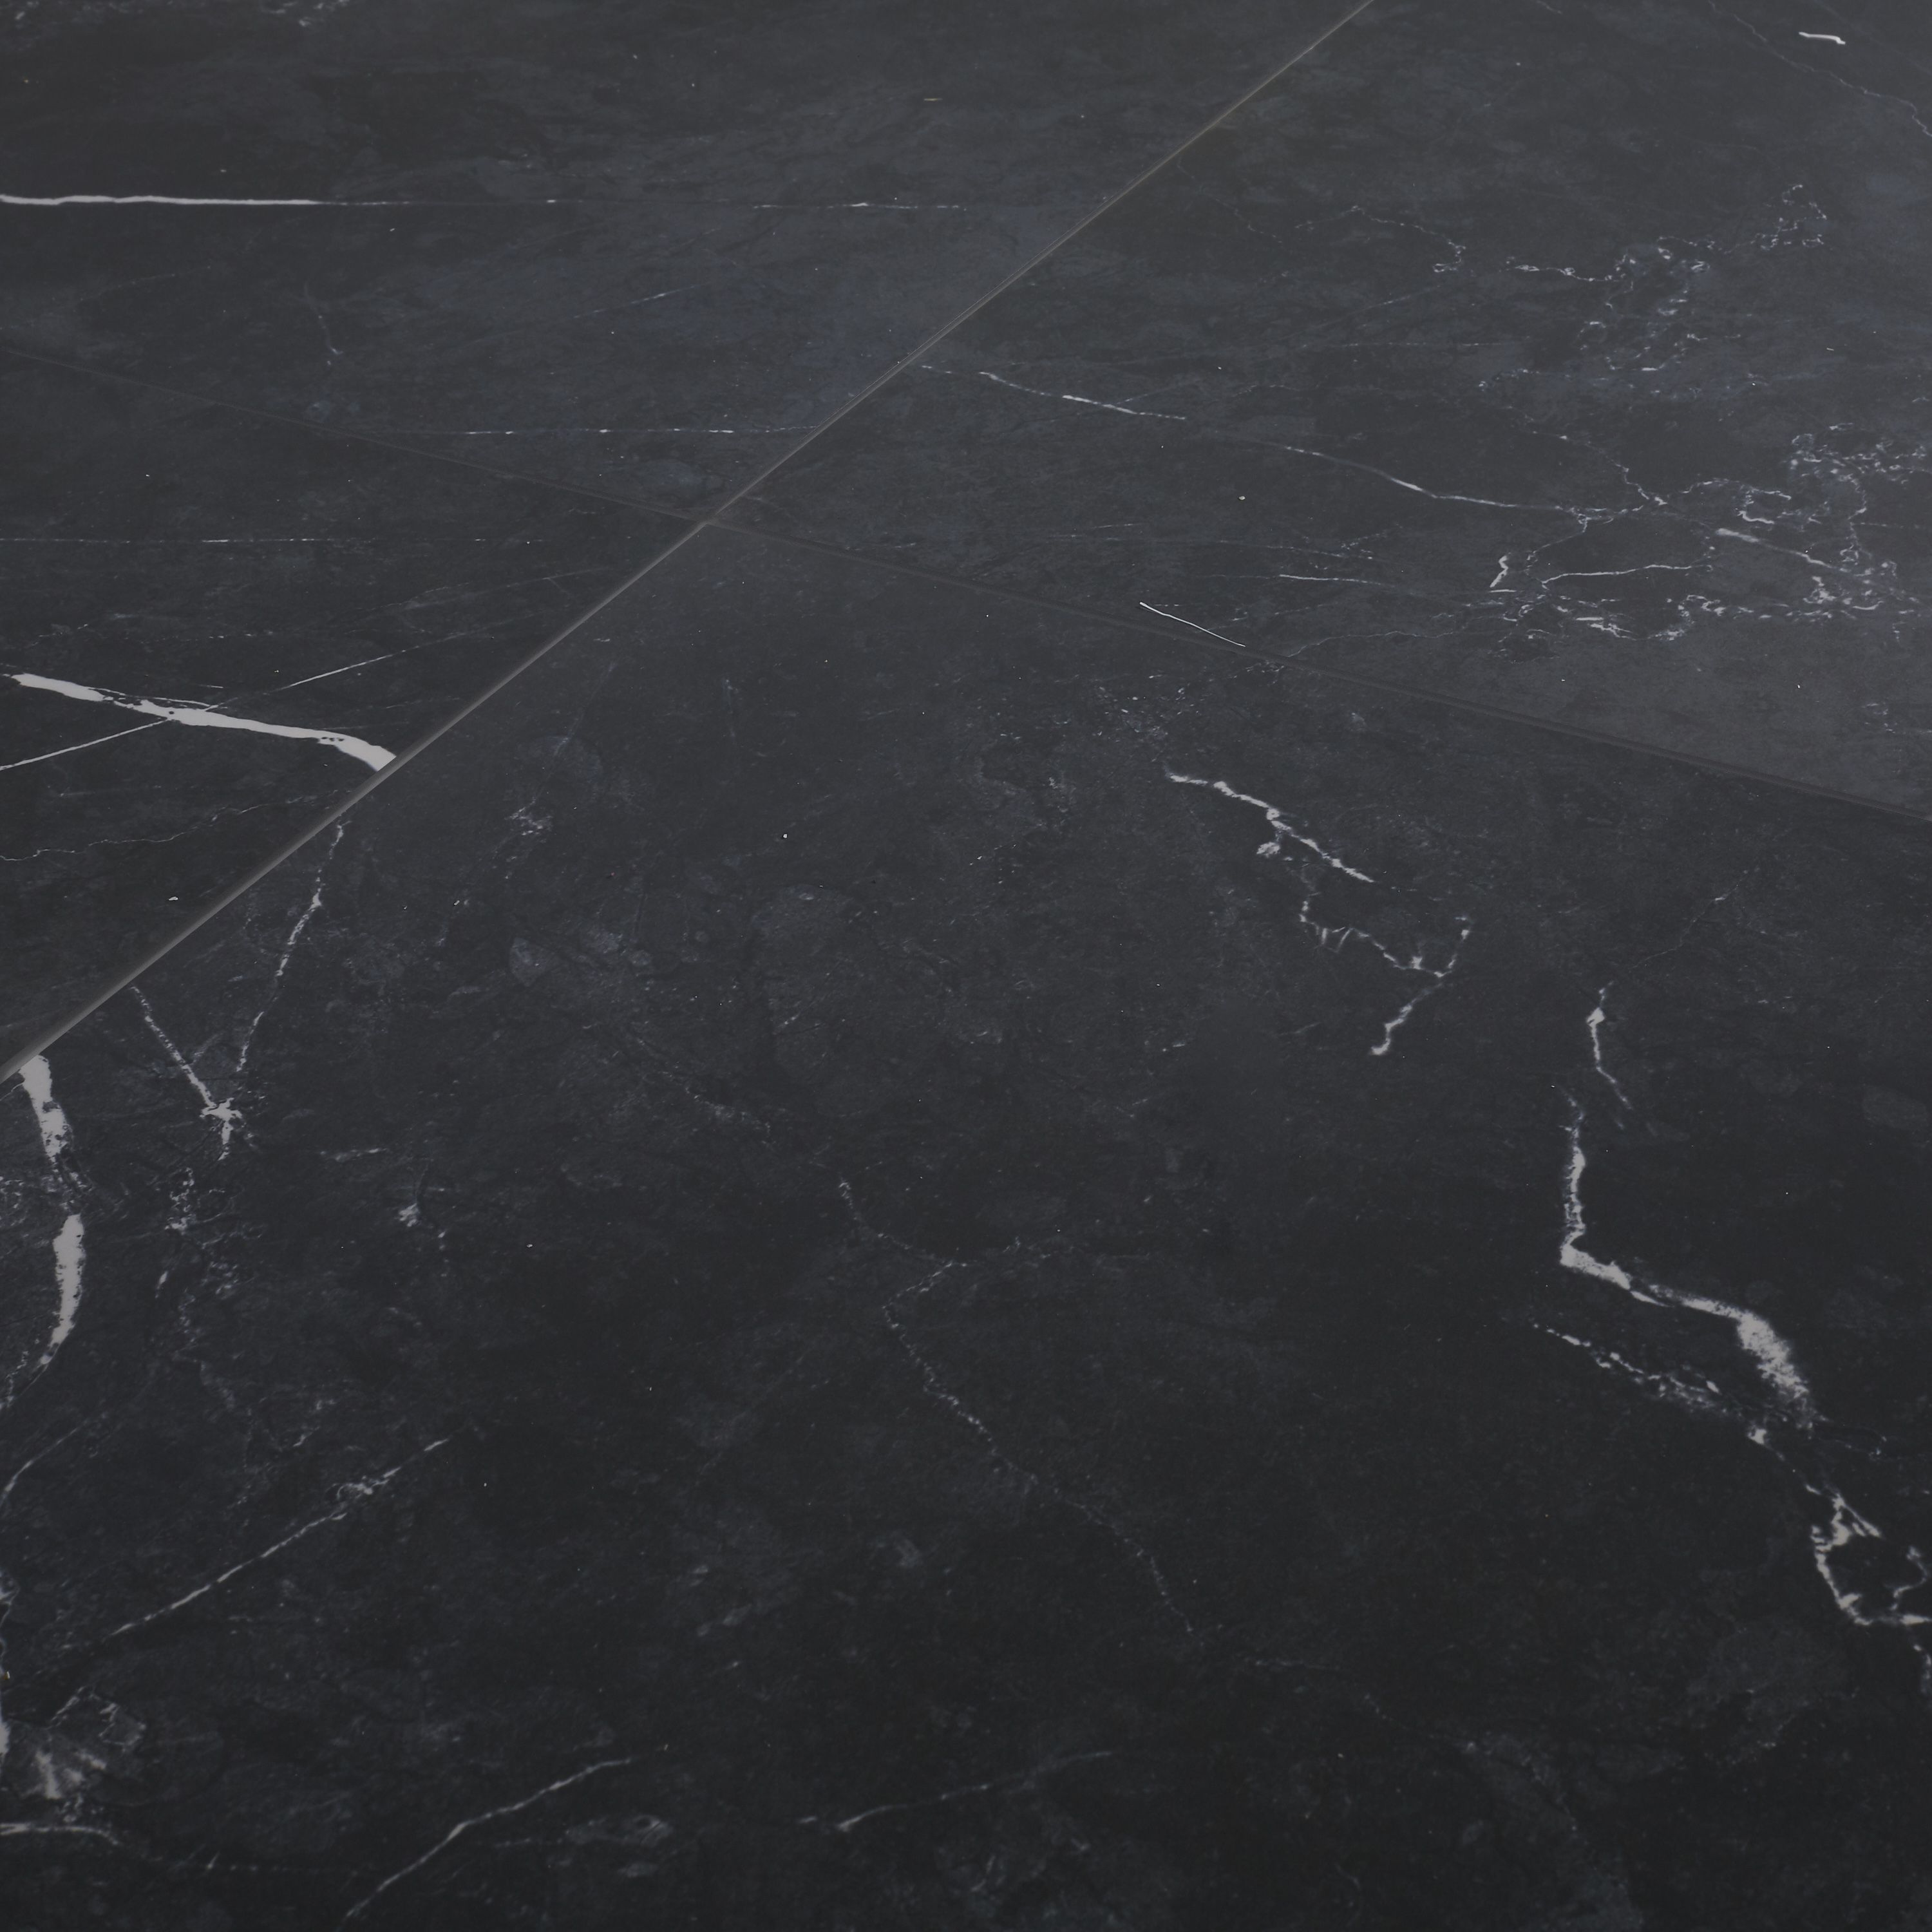 Colours Black Gloss Marble effect Porcelain Indoor Wall & floor Tile, Pack of 3, (L)595mm (W)595mm